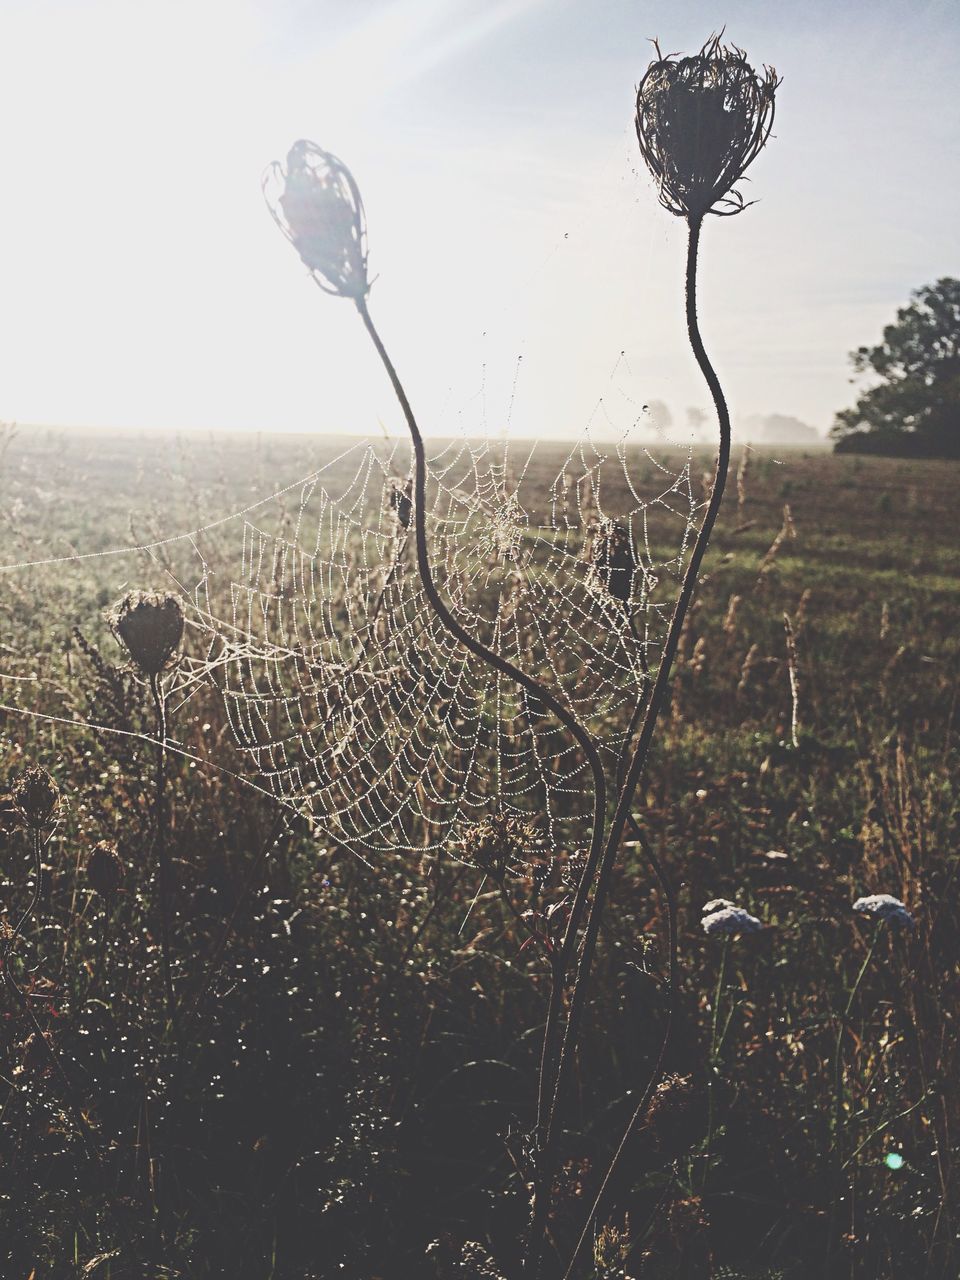 drop, water, transparent, wet, sky, fragility, focus on foreground, nature, close-up, rain, beauty in nature, raindrop, field, tranquility, landscape, day, glass - material, no people, spider web, clear sky